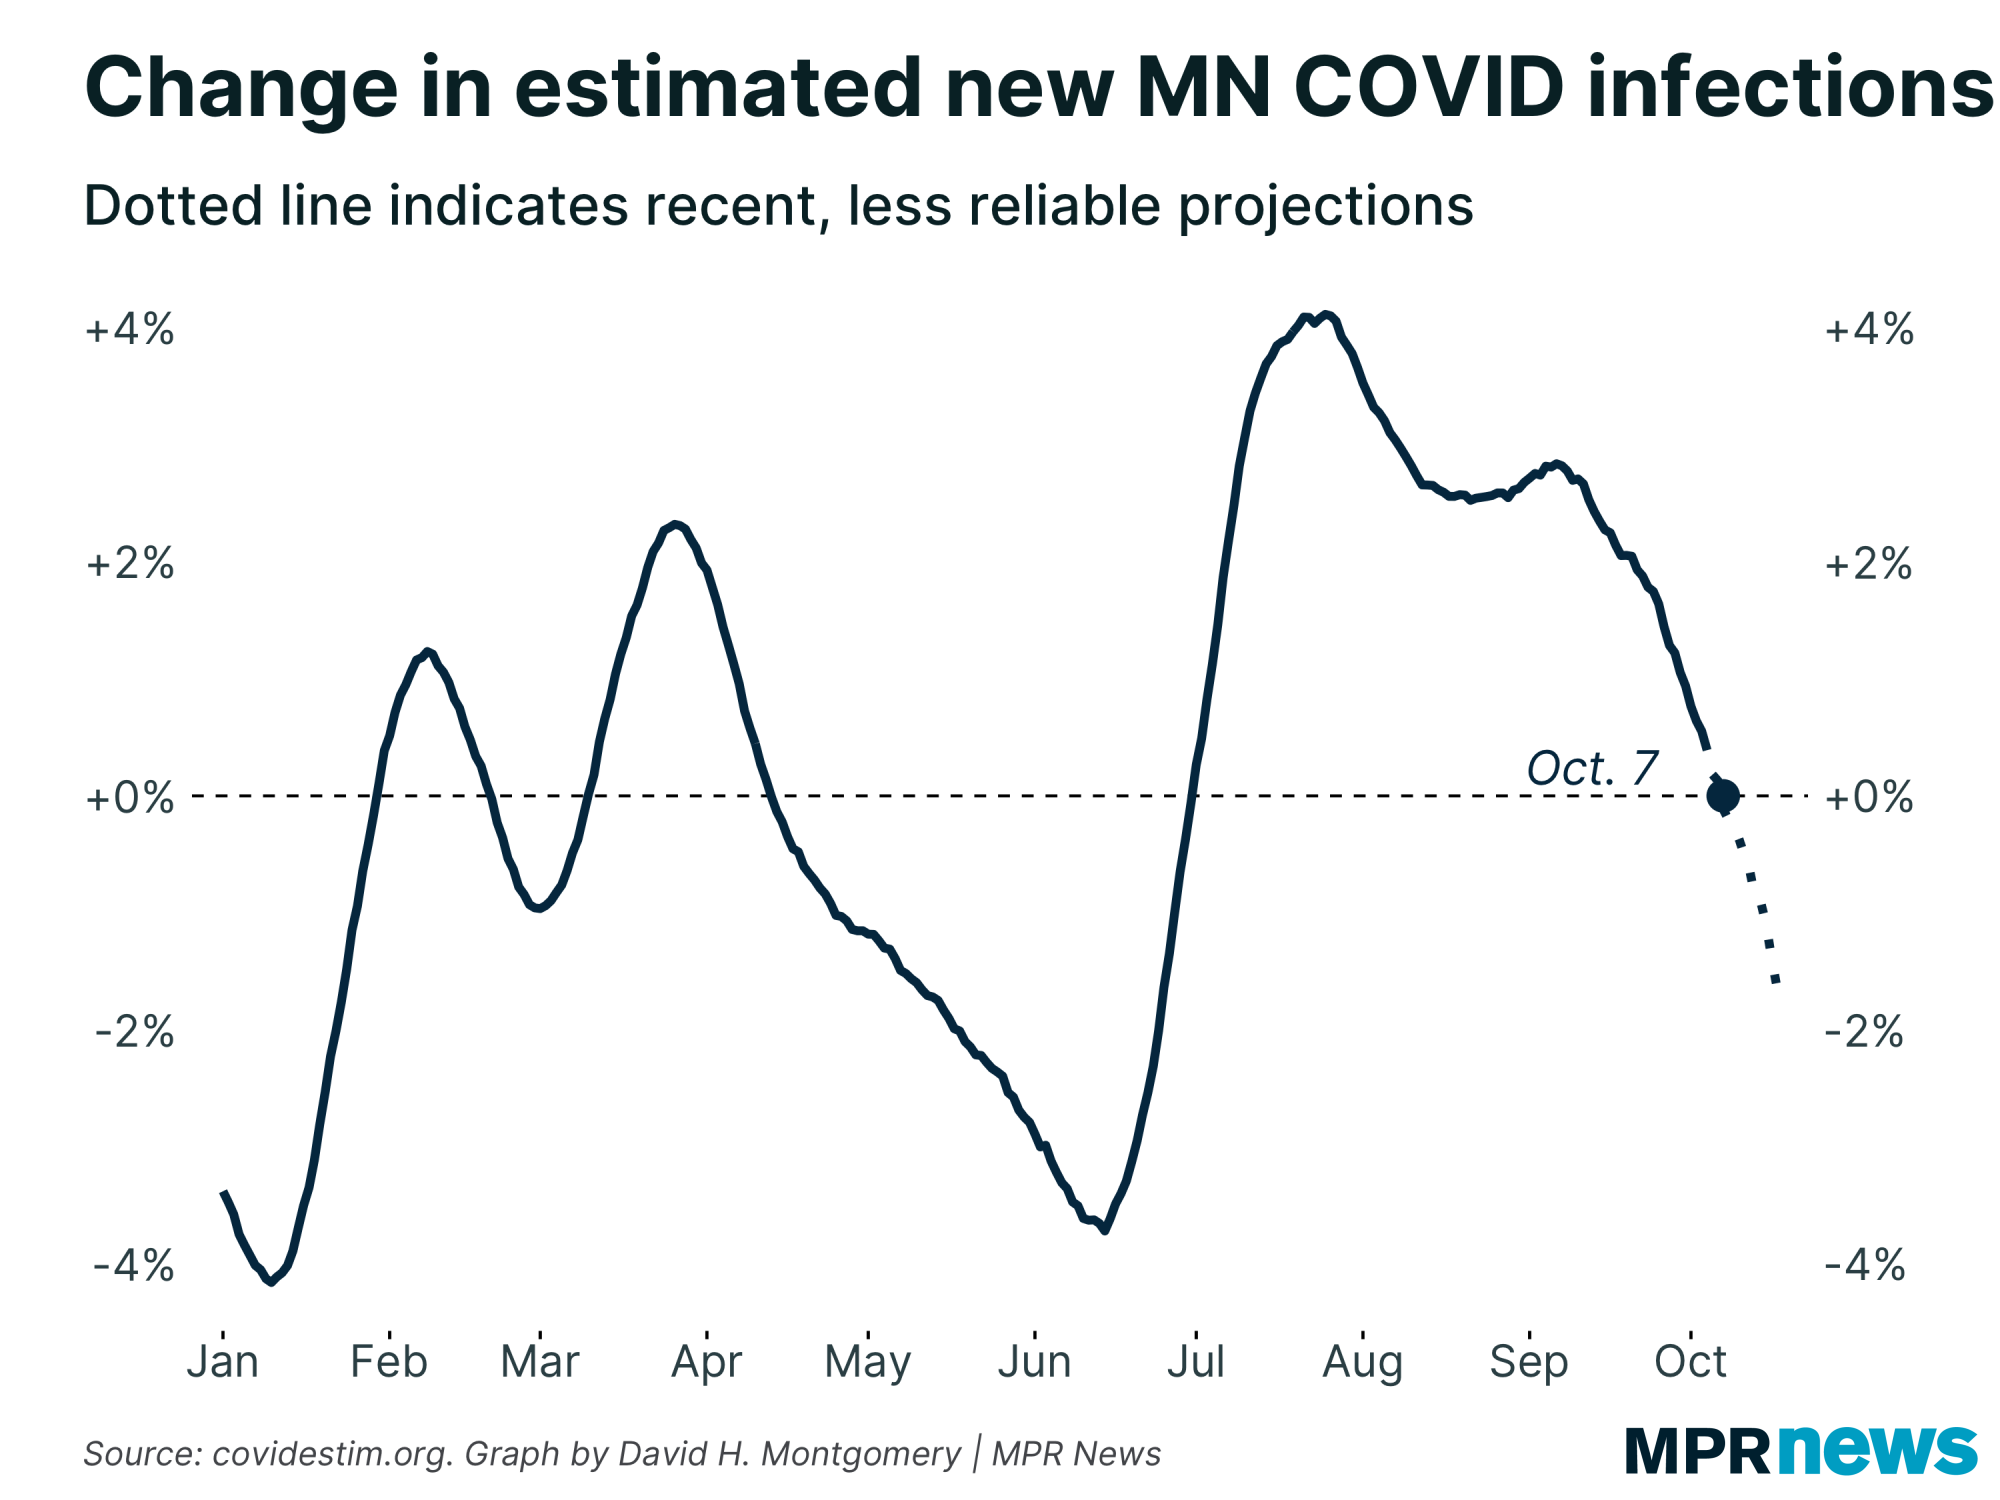 Graph of the change in estimated new Minnesota COVID-19 infections